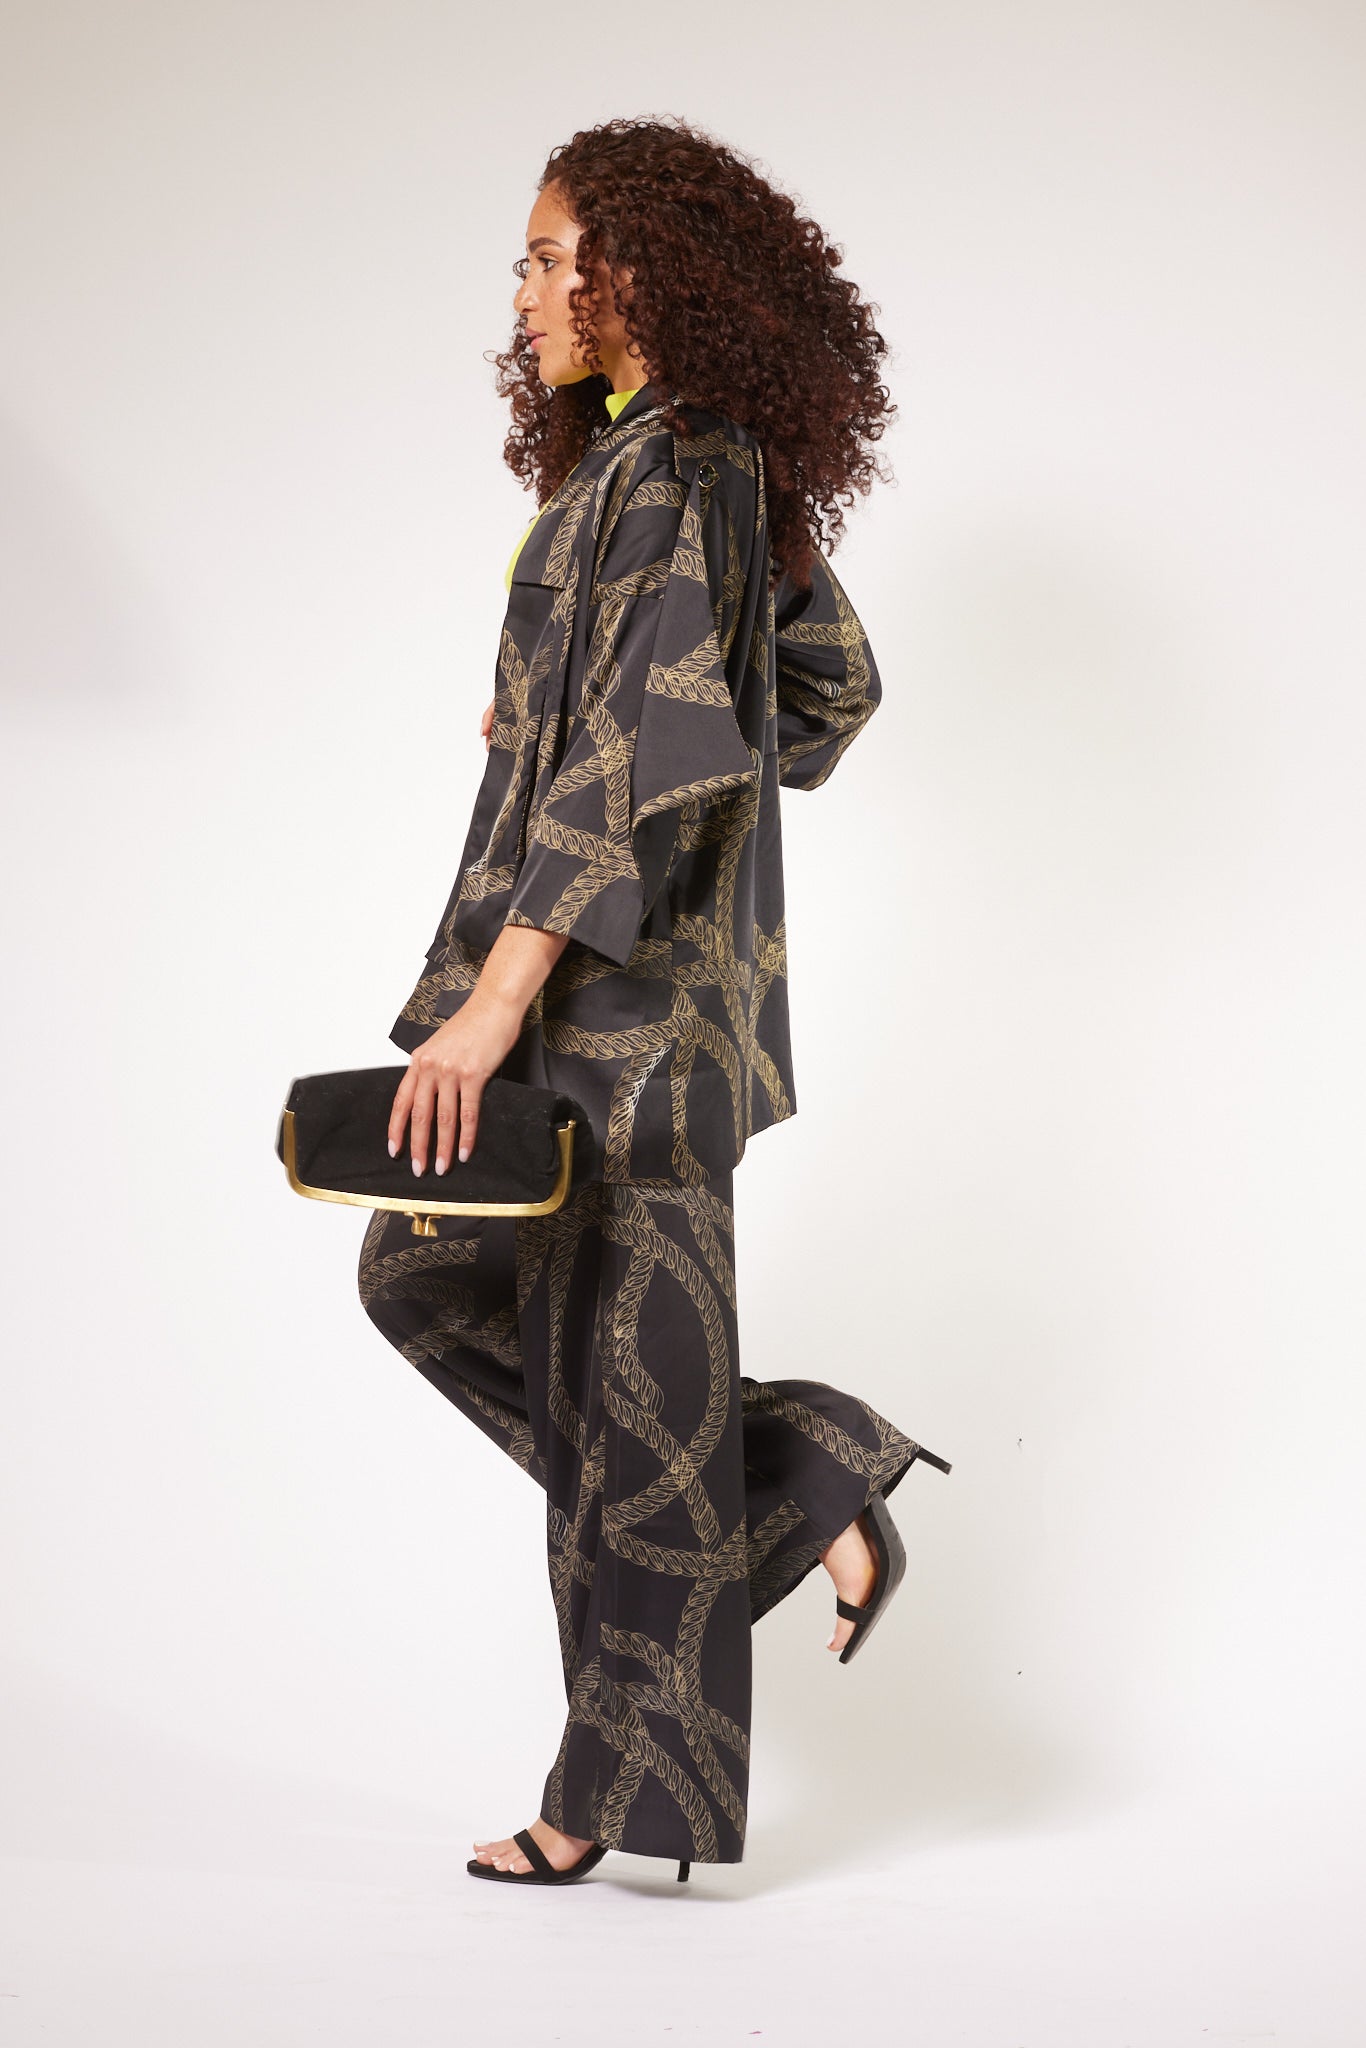 side profile of woman modelling black and gold chains printed kimono duster with matching yacht and high heels 3